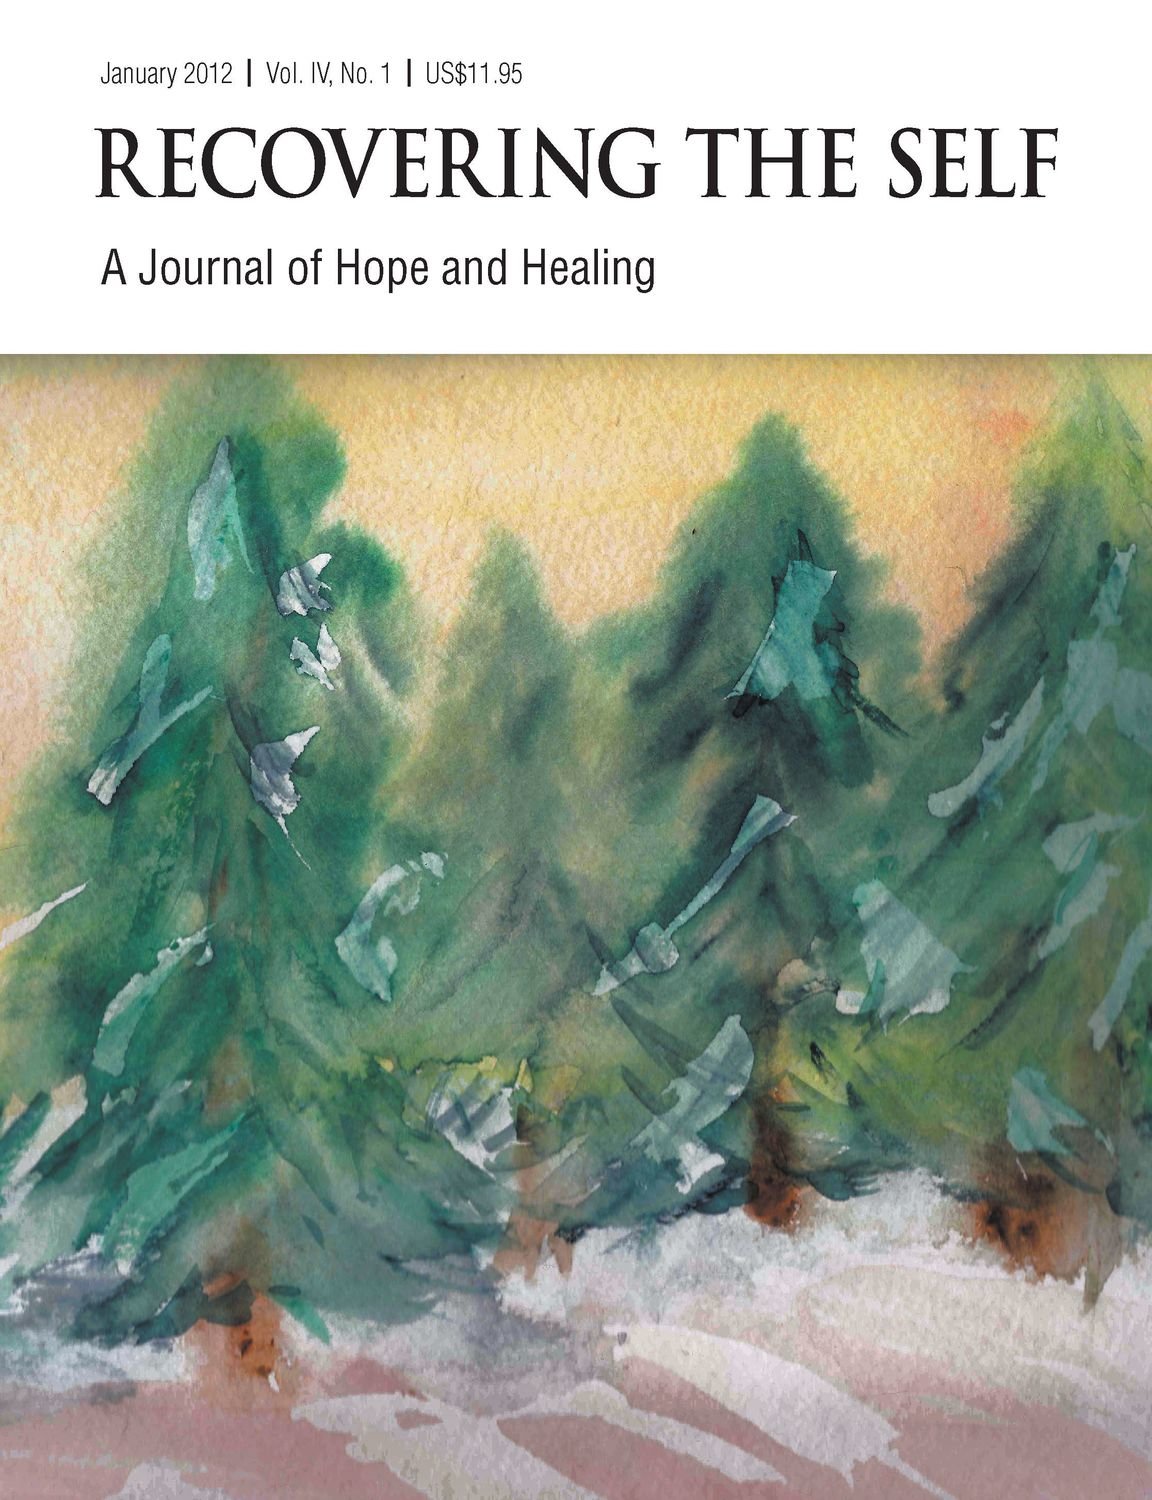 Recovering The Self: A Journal of Hope and Healing (Vol. IV, No. 1) -- Focus on Abuse Recovery